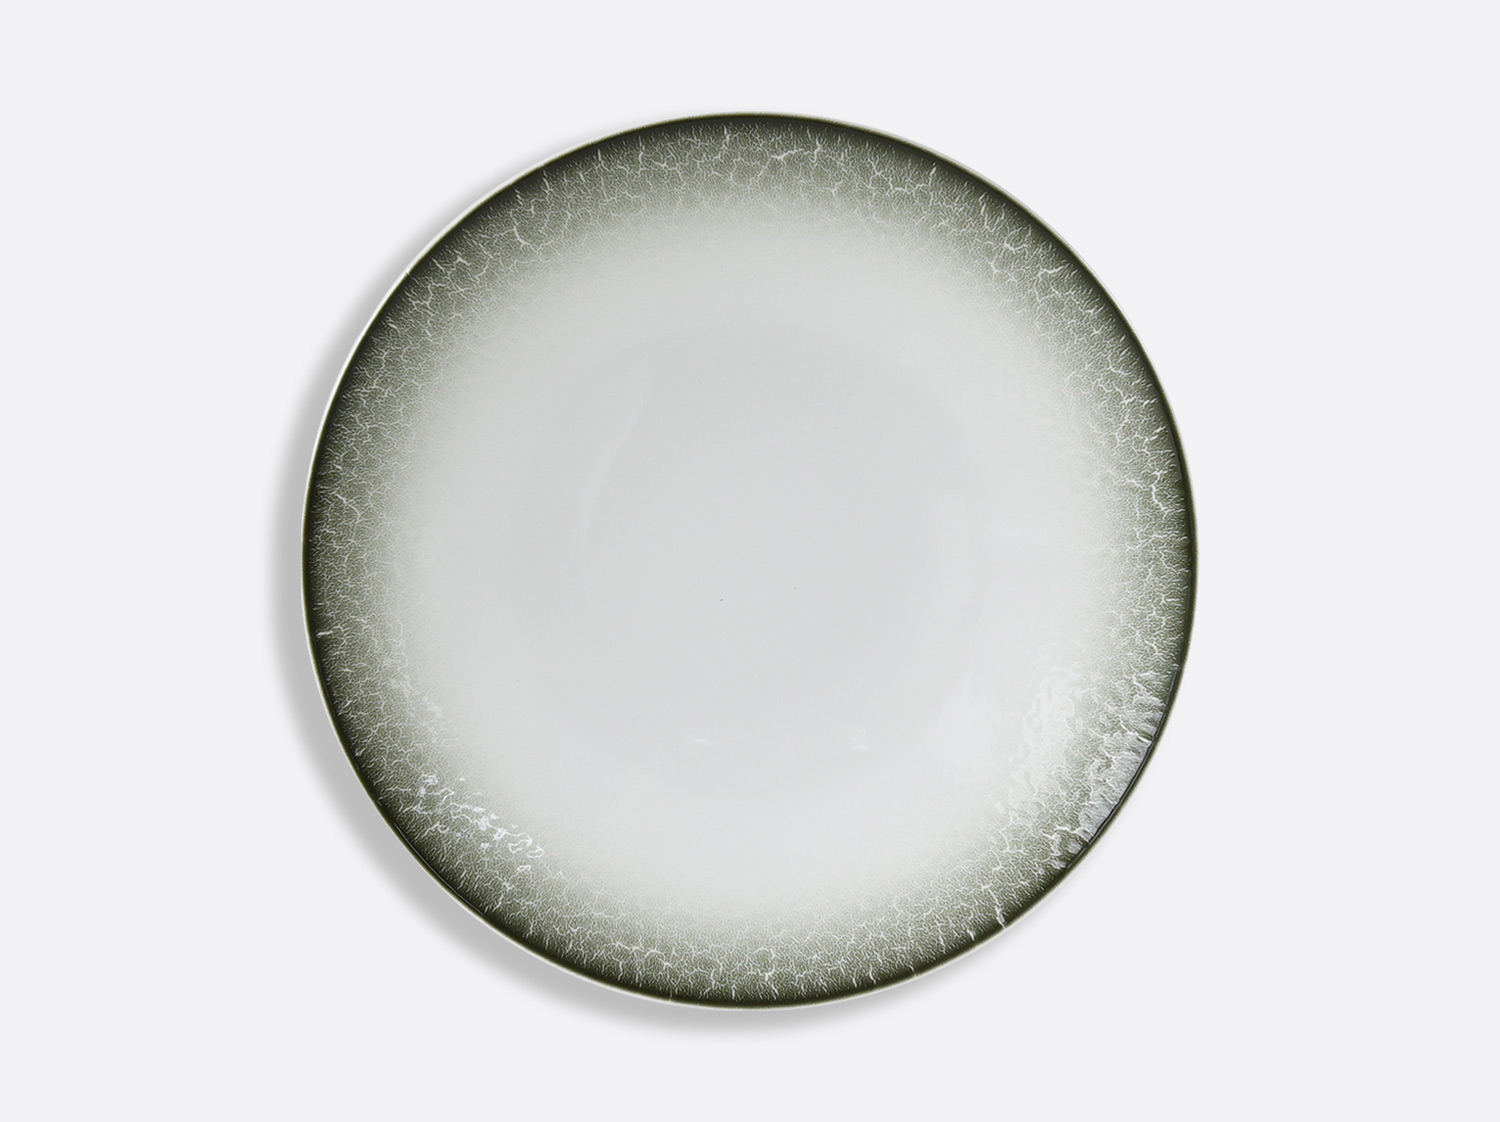 China Coupe plate 10.6" of the collection TERRA LICHEN | Bernardaud